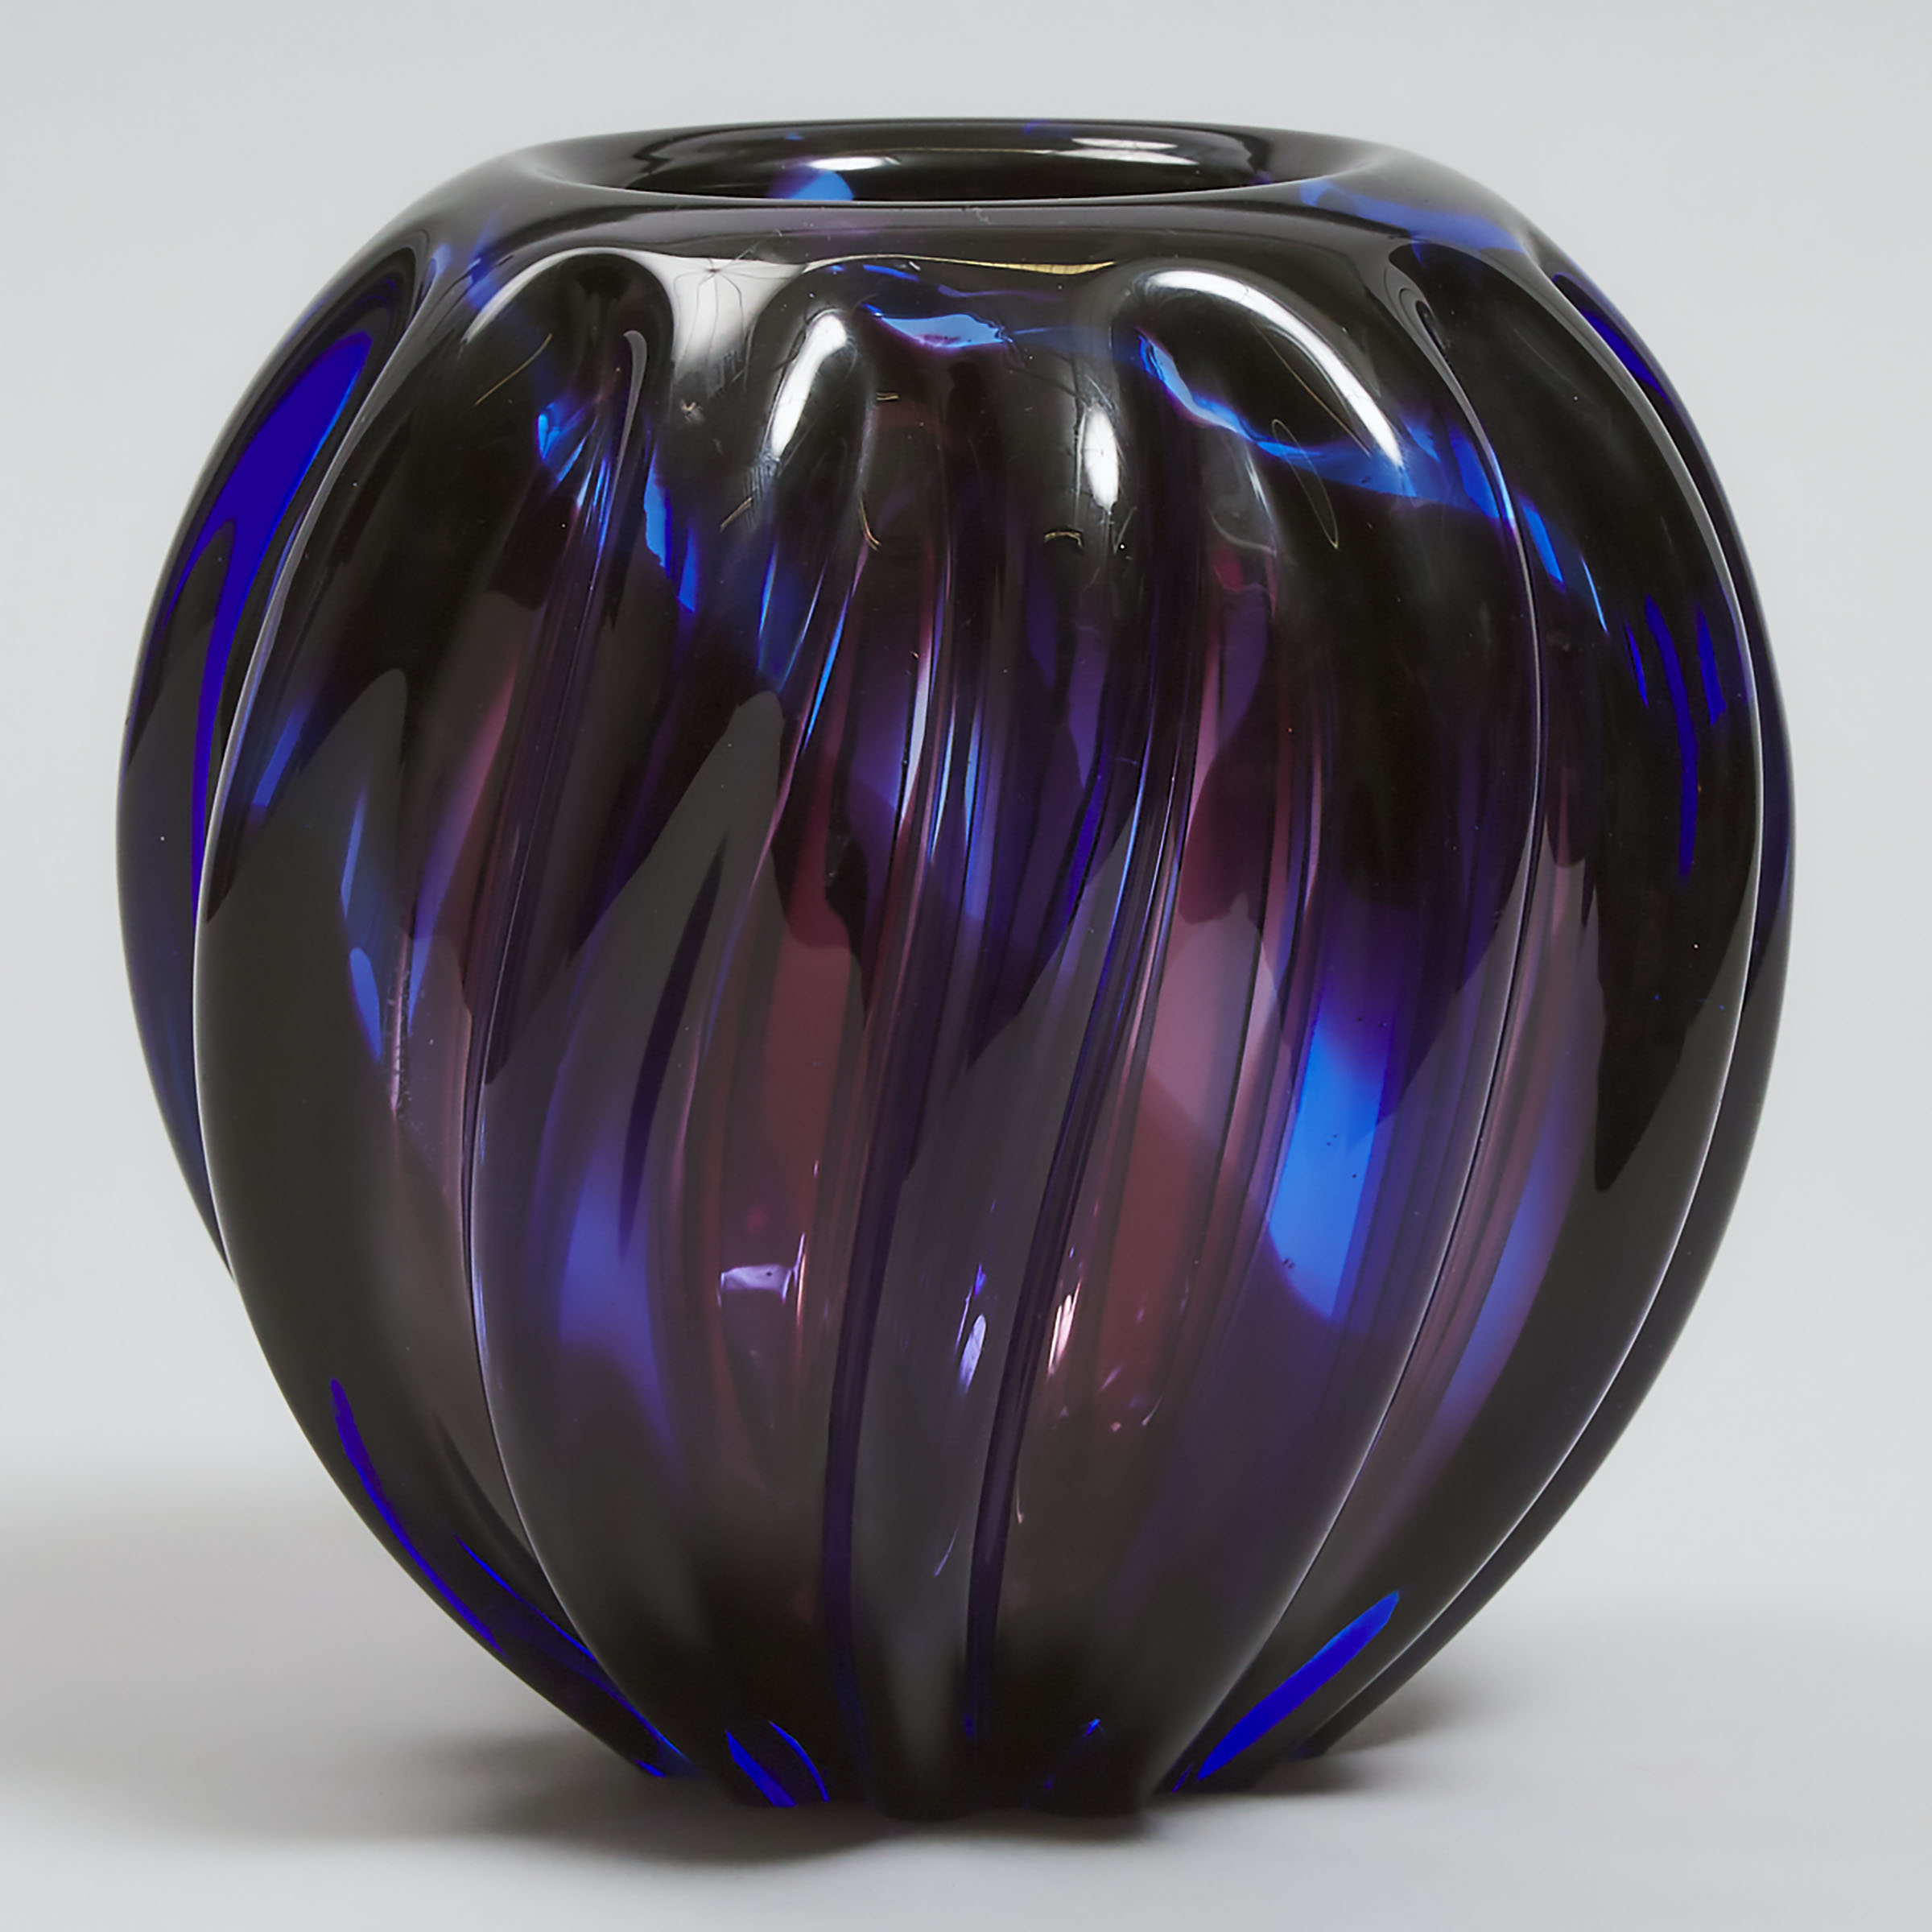 Amethyst and Blue Glass Ribbed Vase, possibly Murano, mid-20th century